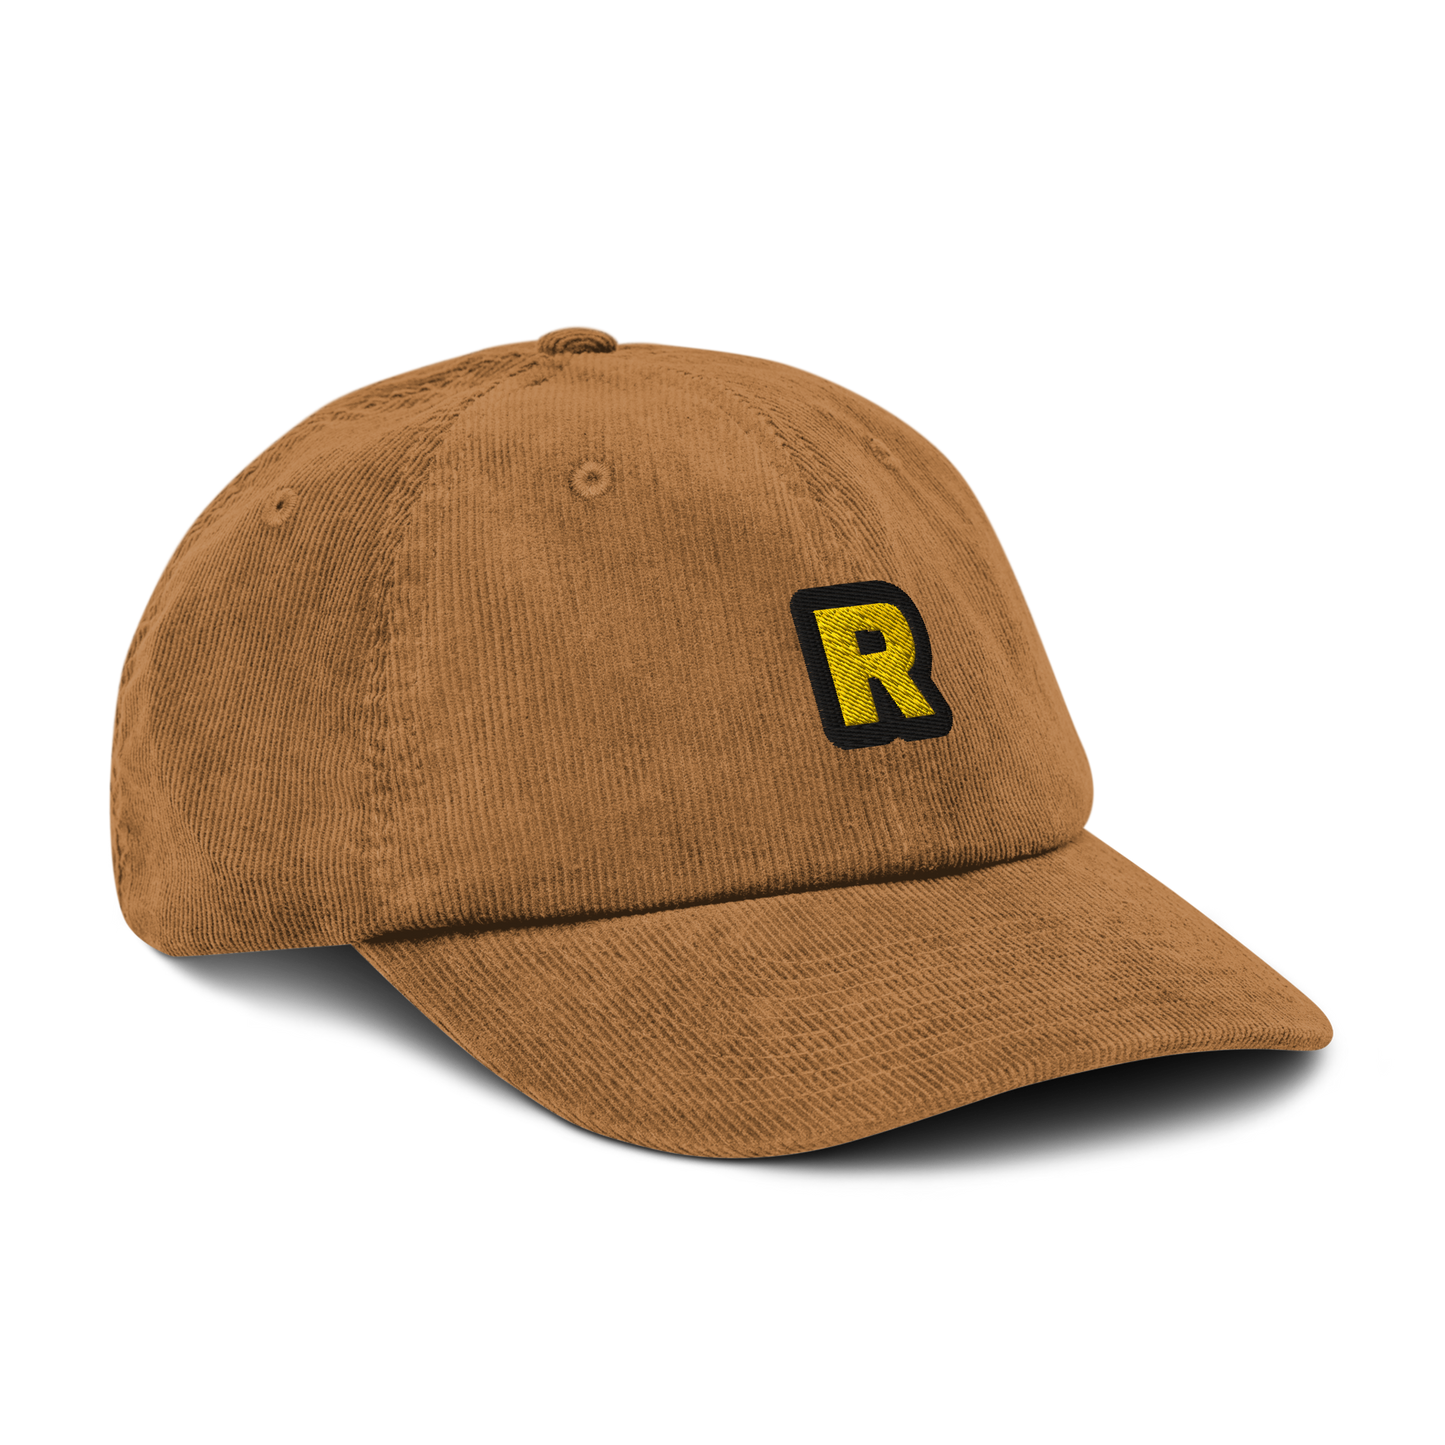 R - The letter collection - Corduroy hat